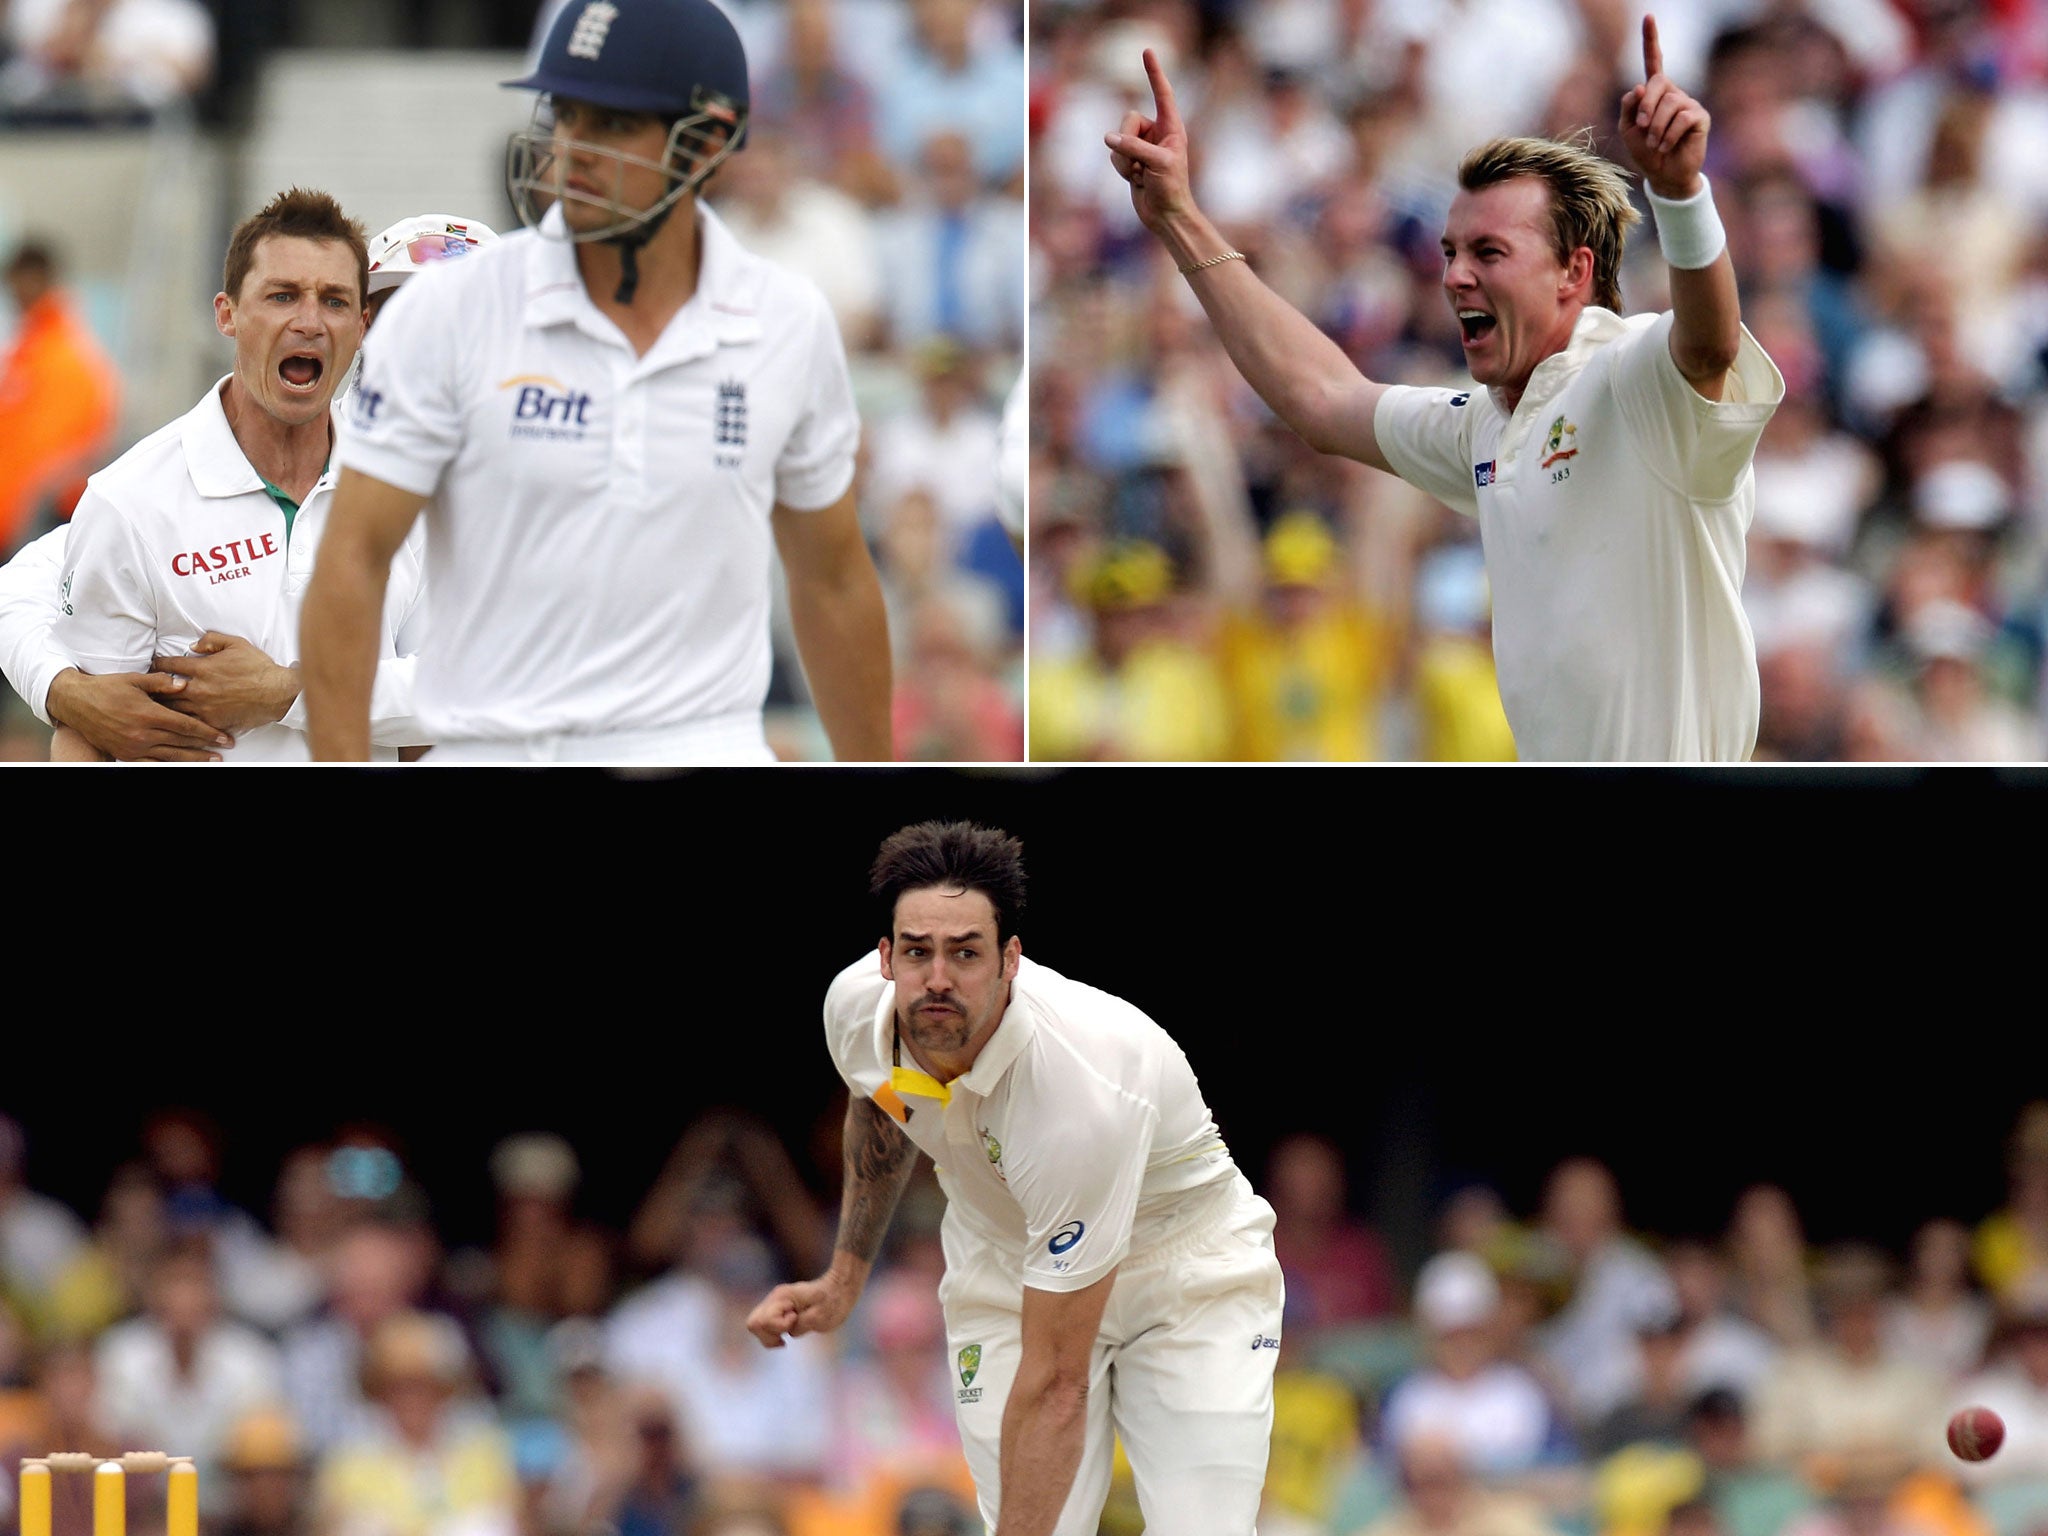 South Africa's Dale Steyn (top left) celebrates bowling Alastair Cook at The Oval in 2012. The fast bowler's consistency is his main strength; Brett Lee (top right) spearheaded Australia's bowling in the mid-Noughties with pace but lacking the X-factor; A